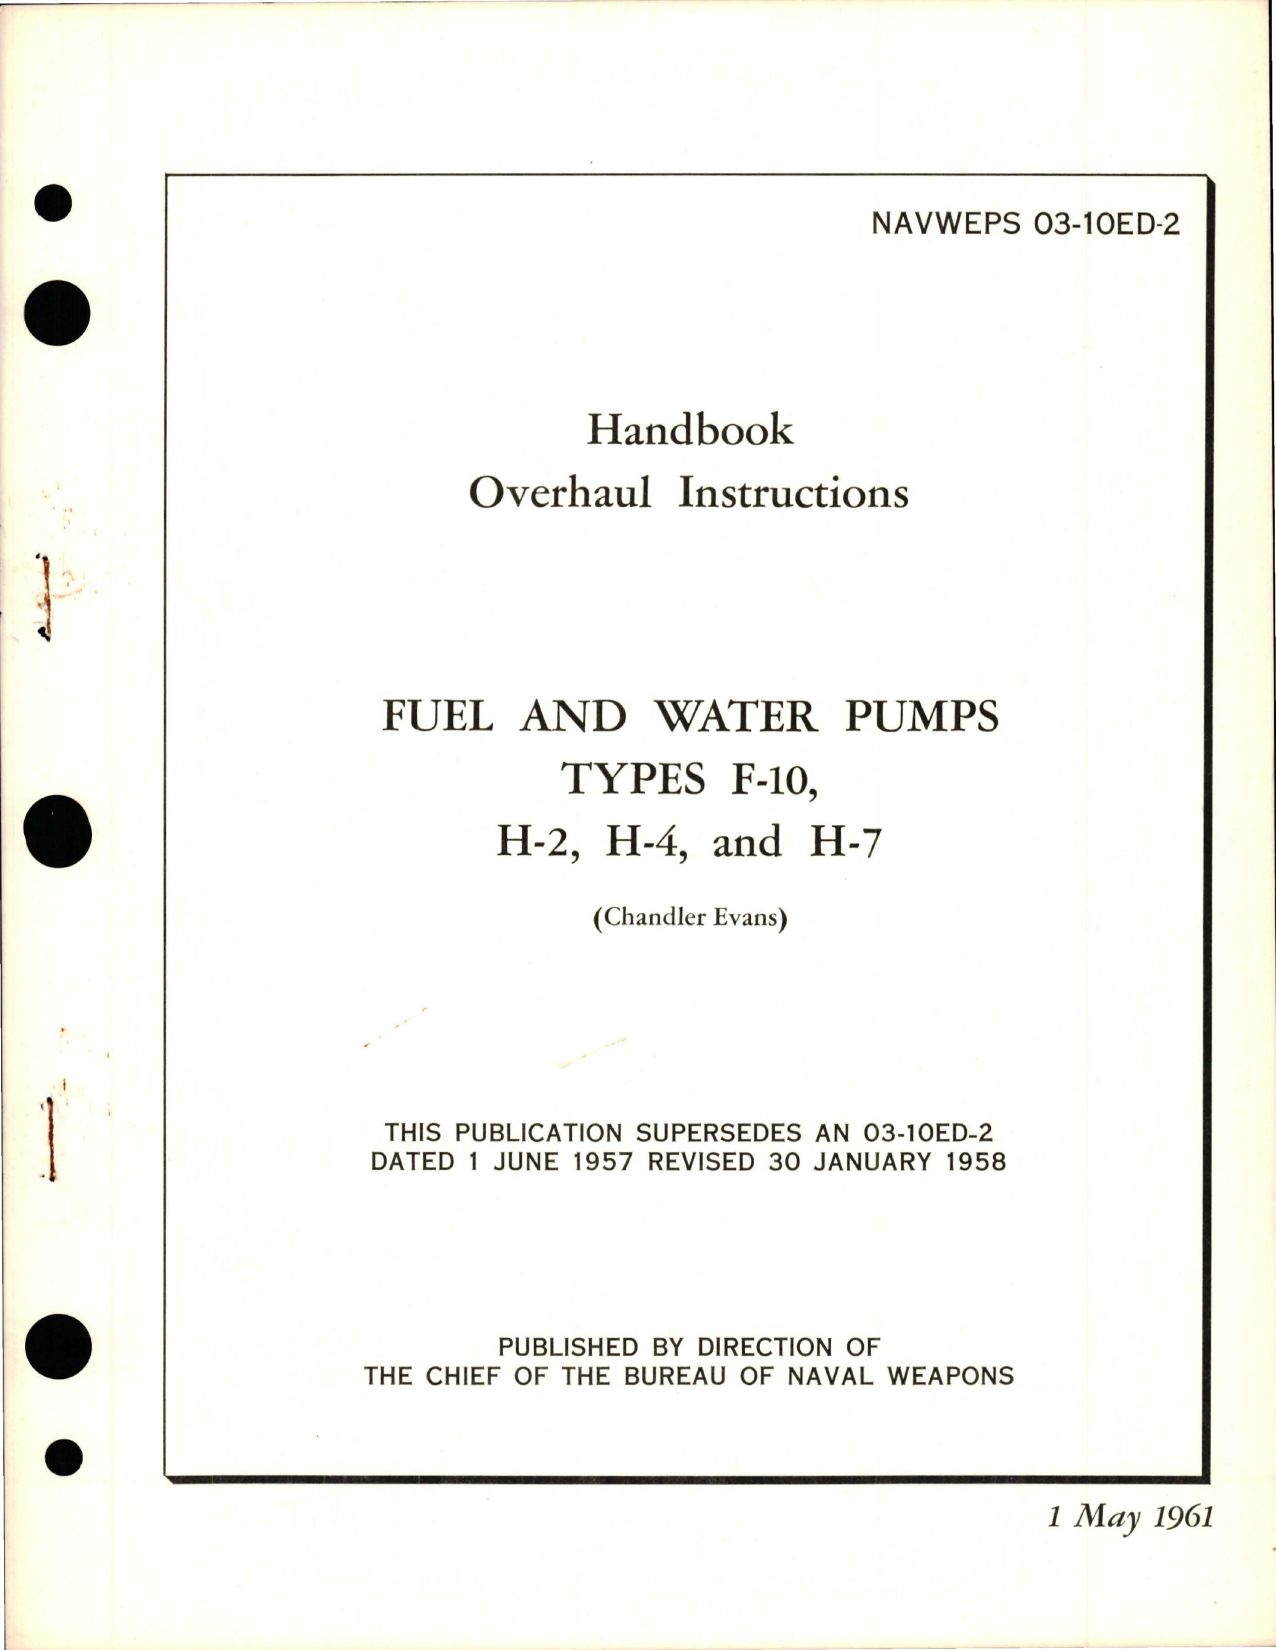 Sample page 1 from AirCorps Library document: Overhaul Instructions for Fuel and Water Pumps - Types F-10, H-2, H-4, and H-7